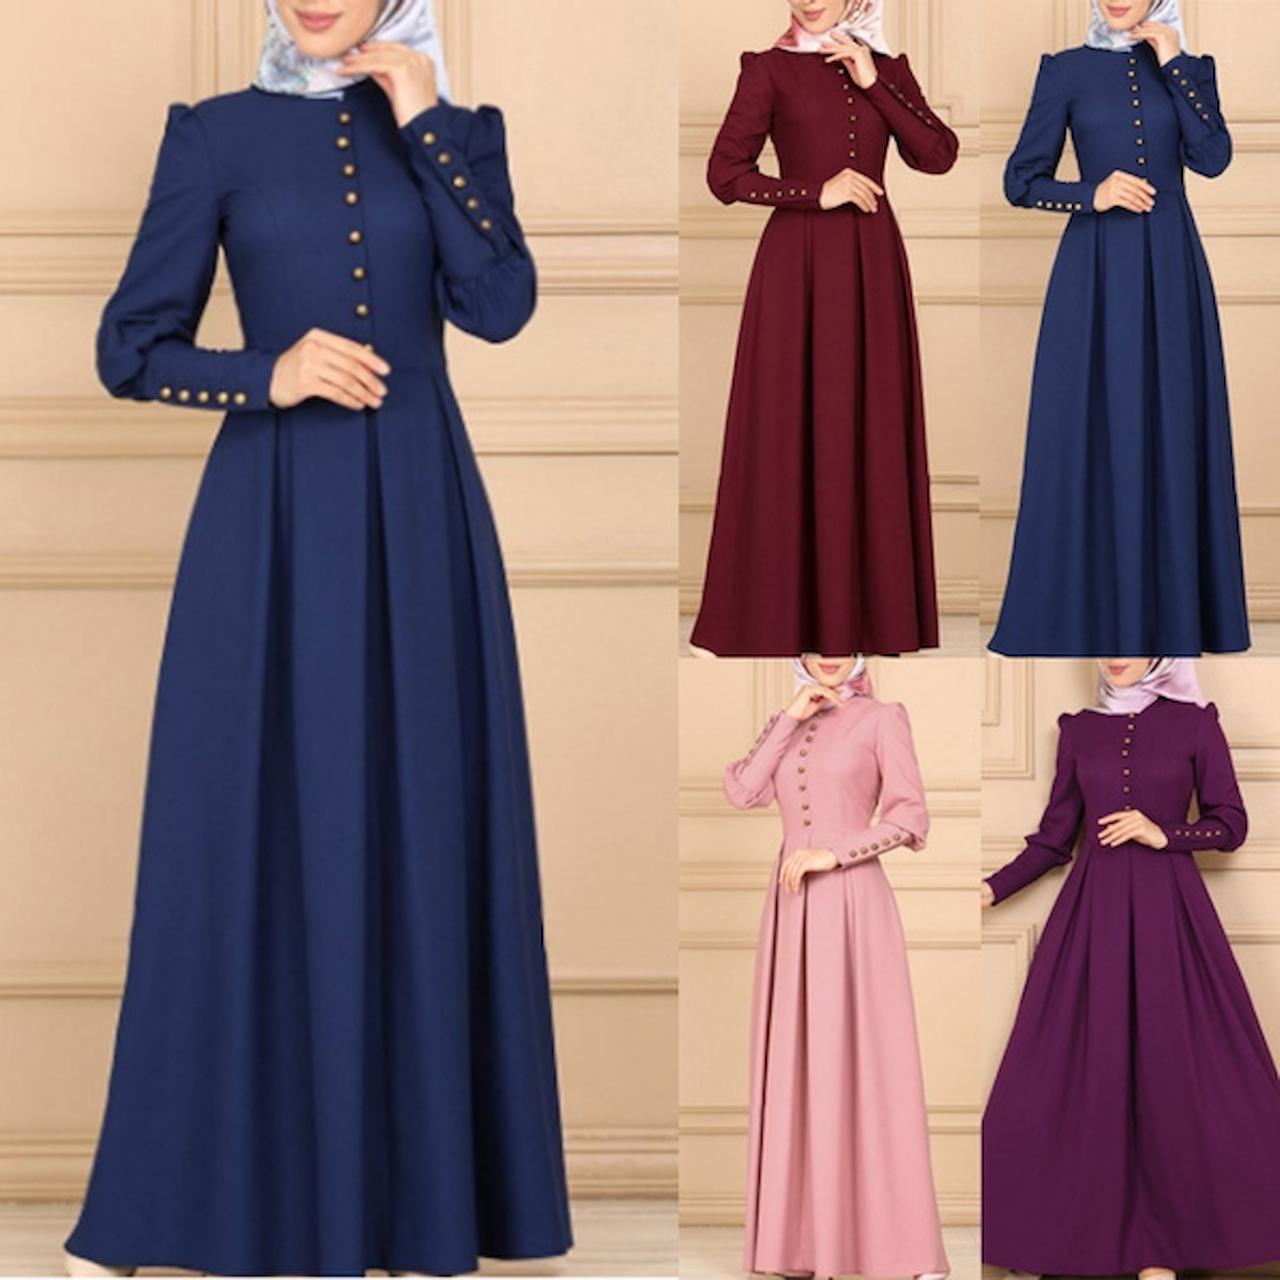 Why Are Contemporary Islamic Dresses For Women Becoming Popular?